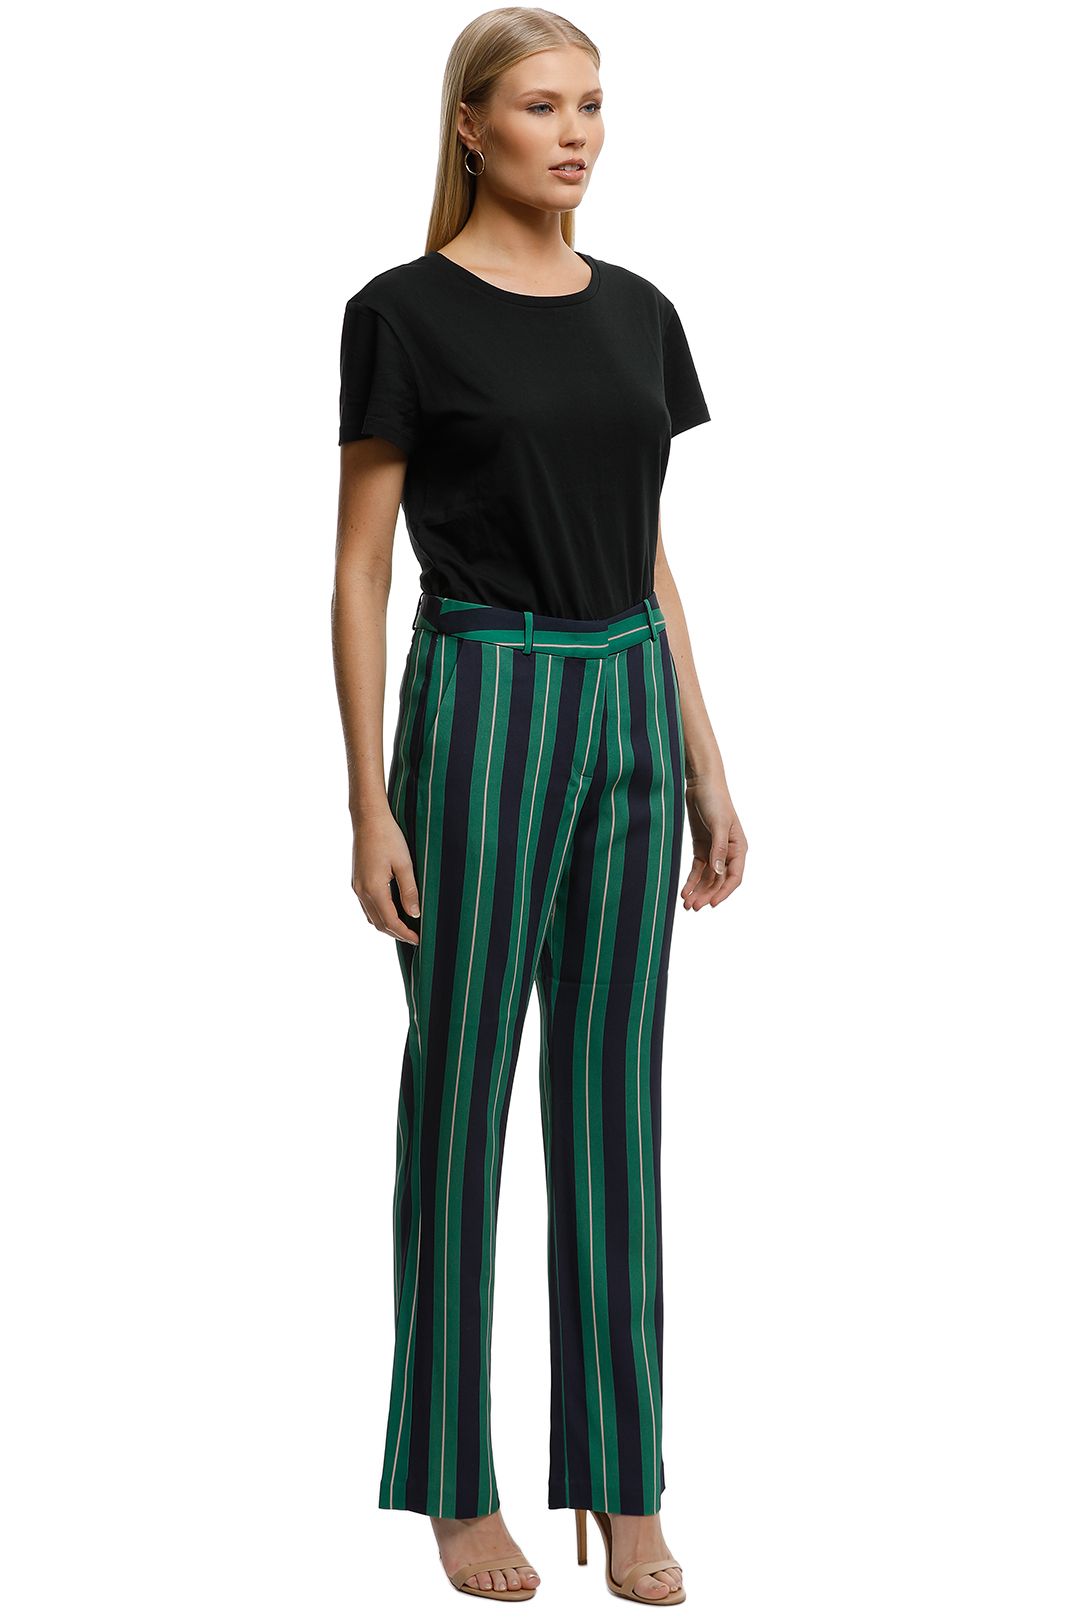 Moss-and-Spy-Gatsby-Pant-Green-Stripe-Side